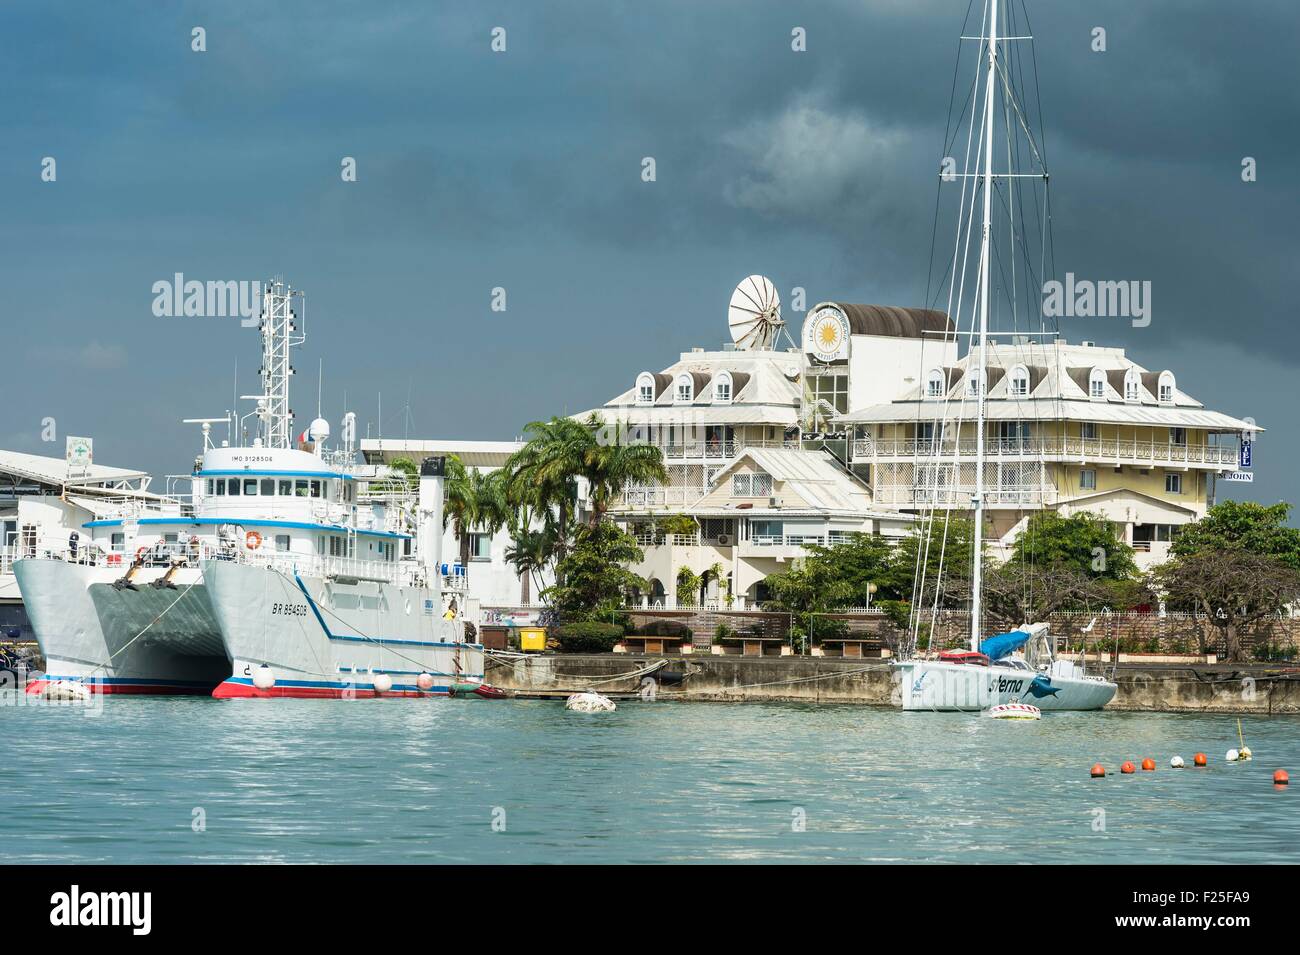 France, Guadeloupe (French West Indies), Grande Terre, Pointe a Pitre, Saint John Perse hotel Stock Photo